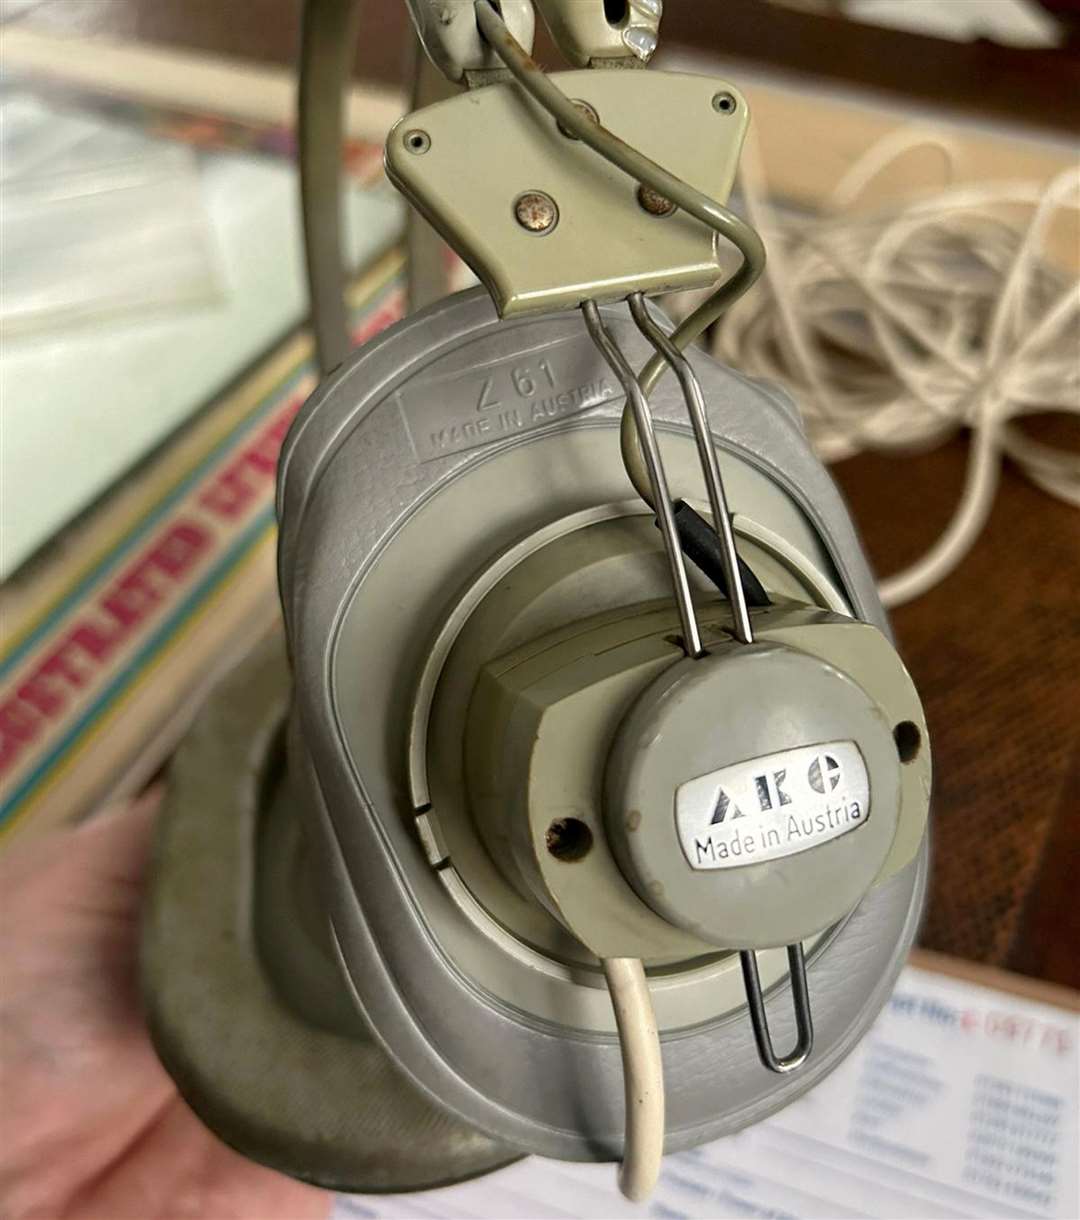 The AKG K60 headphones are expected to be sold for £3,000. Picture: SWNS